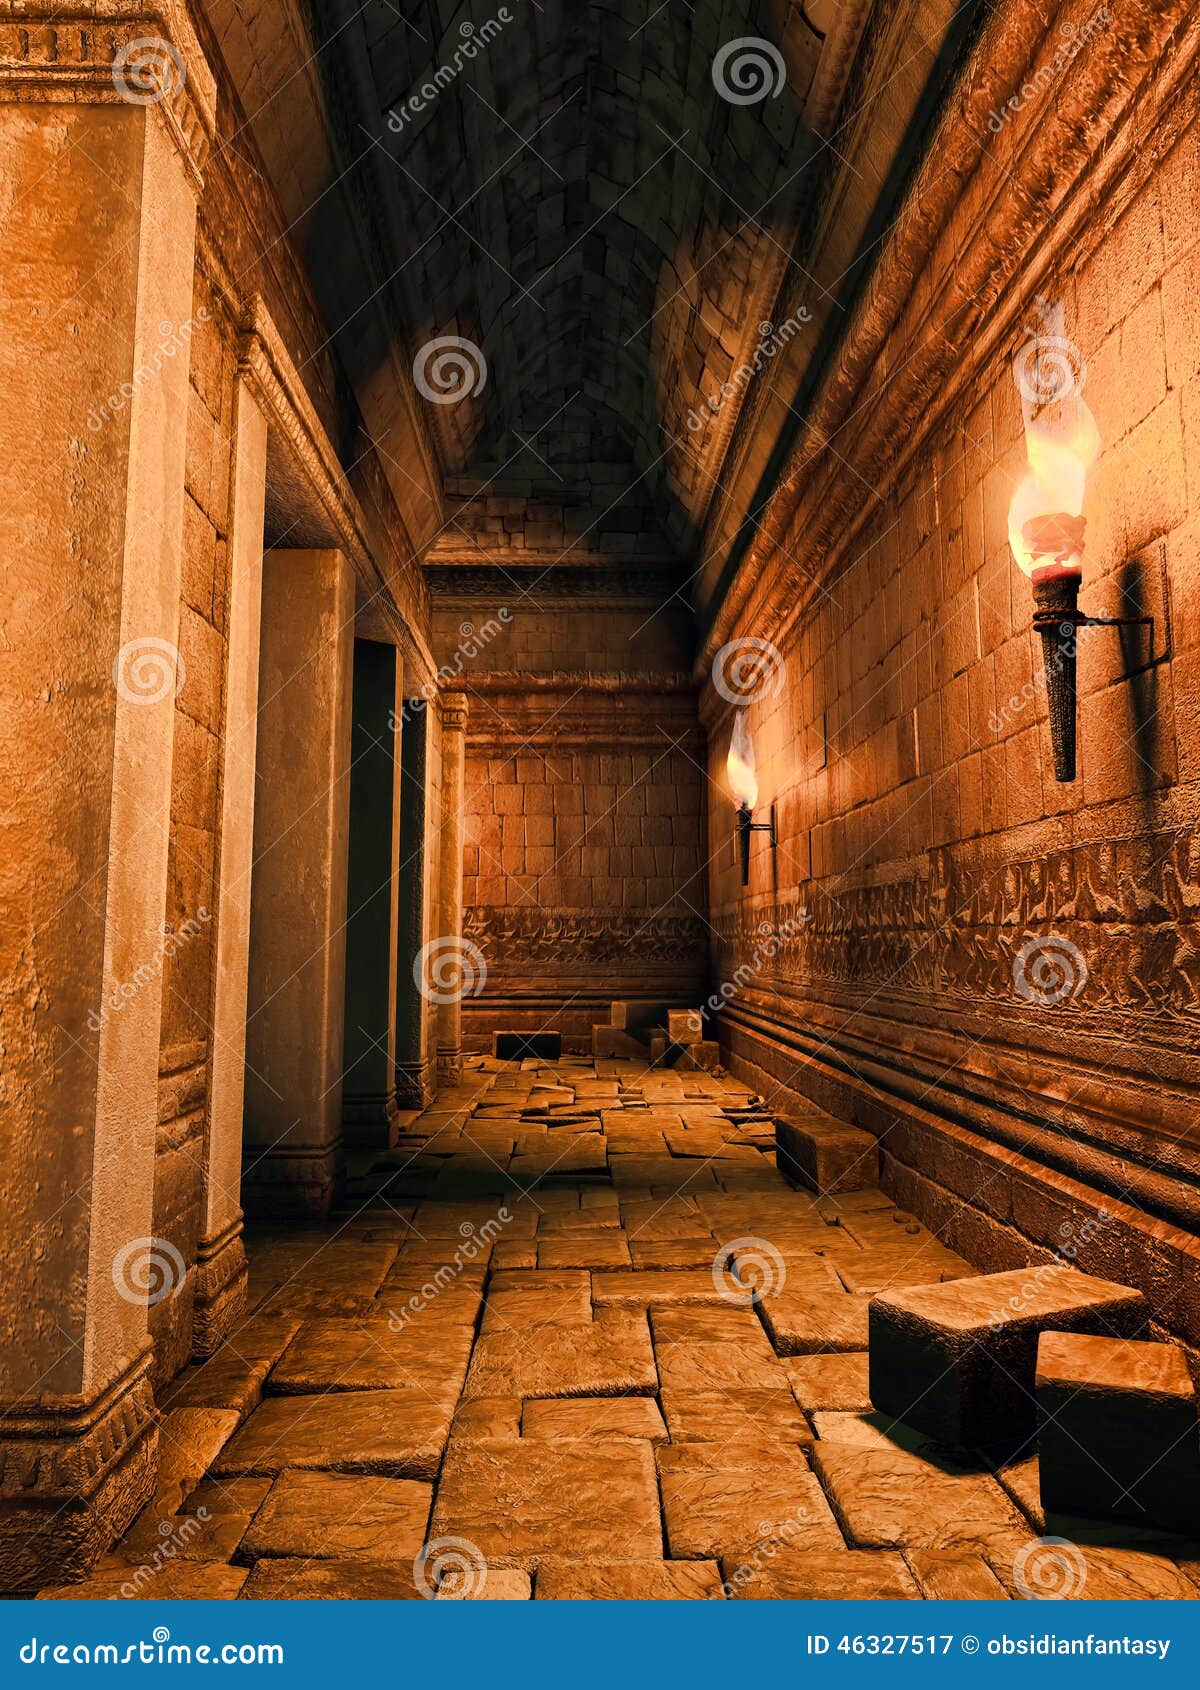 Old ruined corridor lit by torchlight